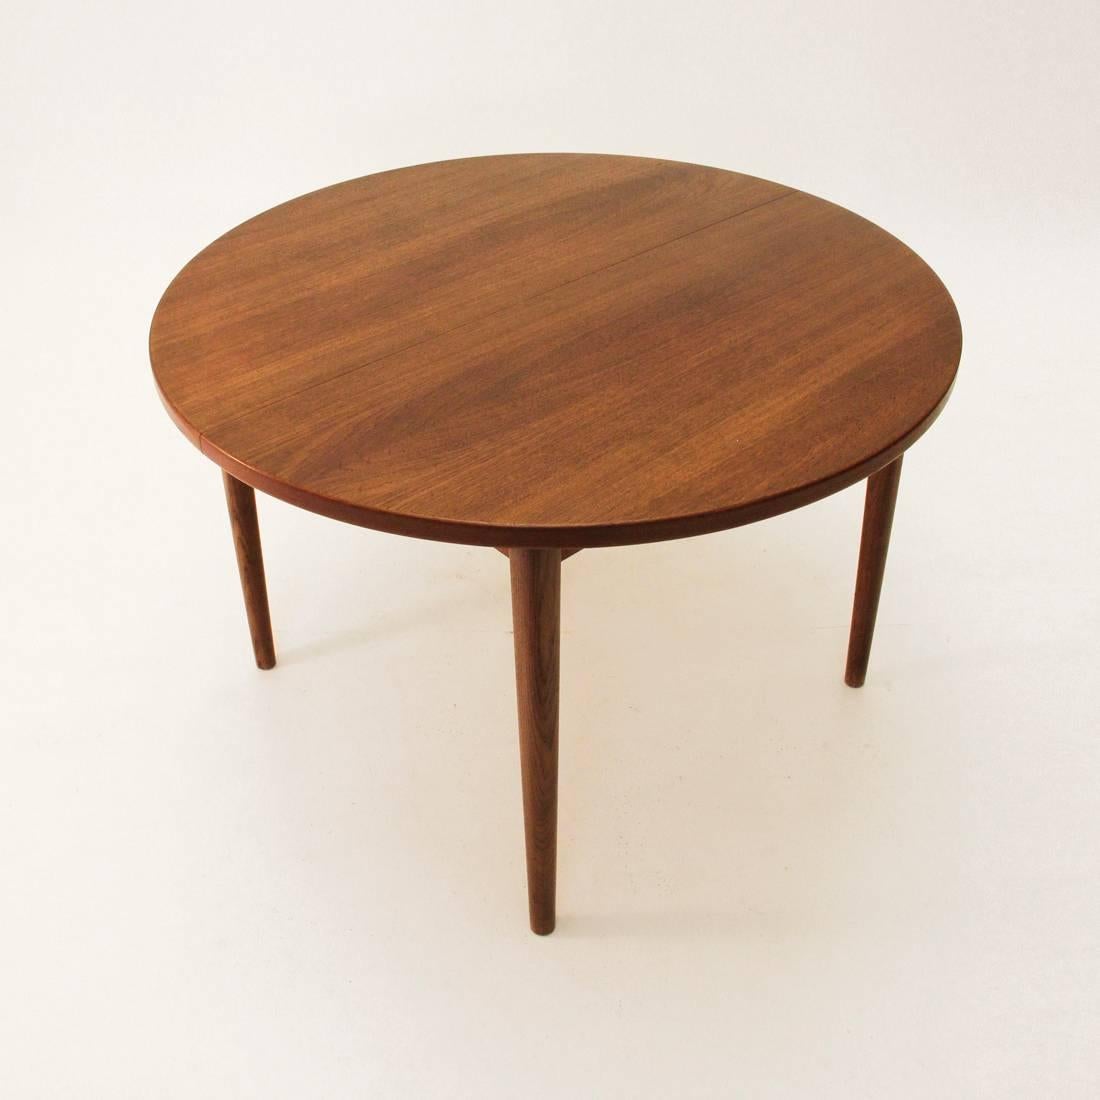 Scandinavian table from the 1960s.
Teak structure and tabletop.
Circular table produced by the famous company Hugo Troeds.
With extension of 40cm hidden under the opening top.